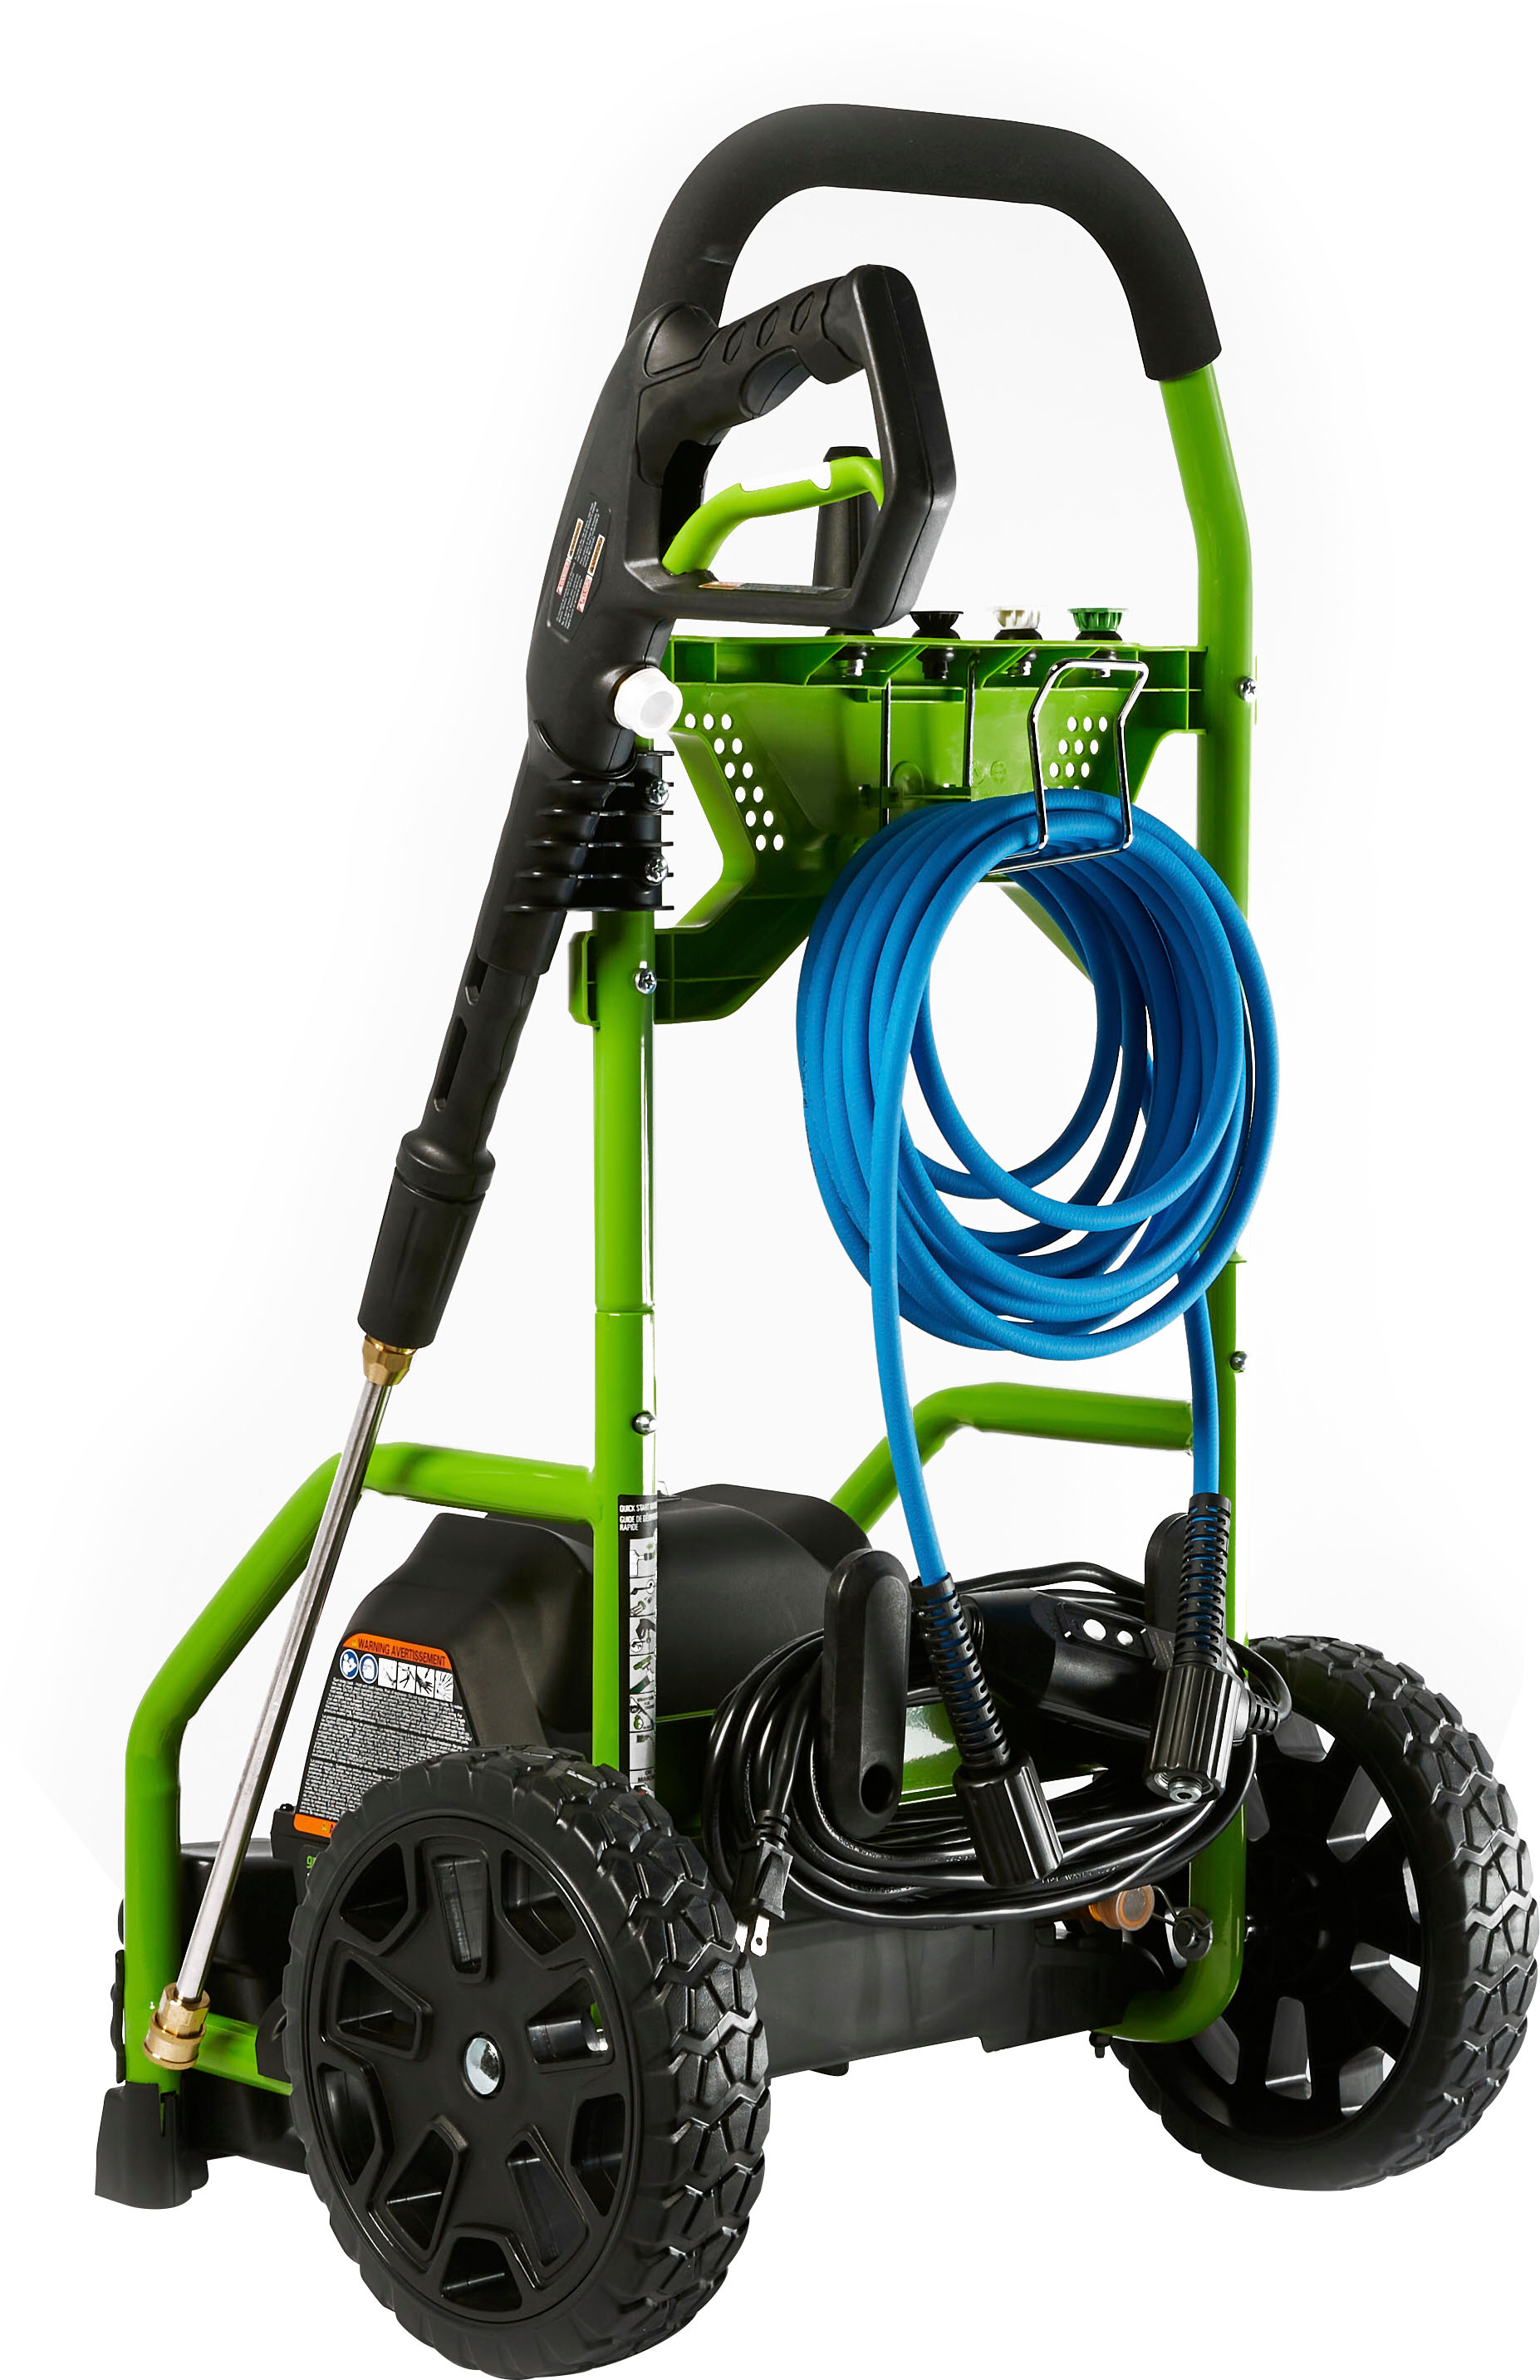 2.0 GPM Electric High Pressure Washer, Cleans Cars/Fences/Patios, 1 unit -  Kroger